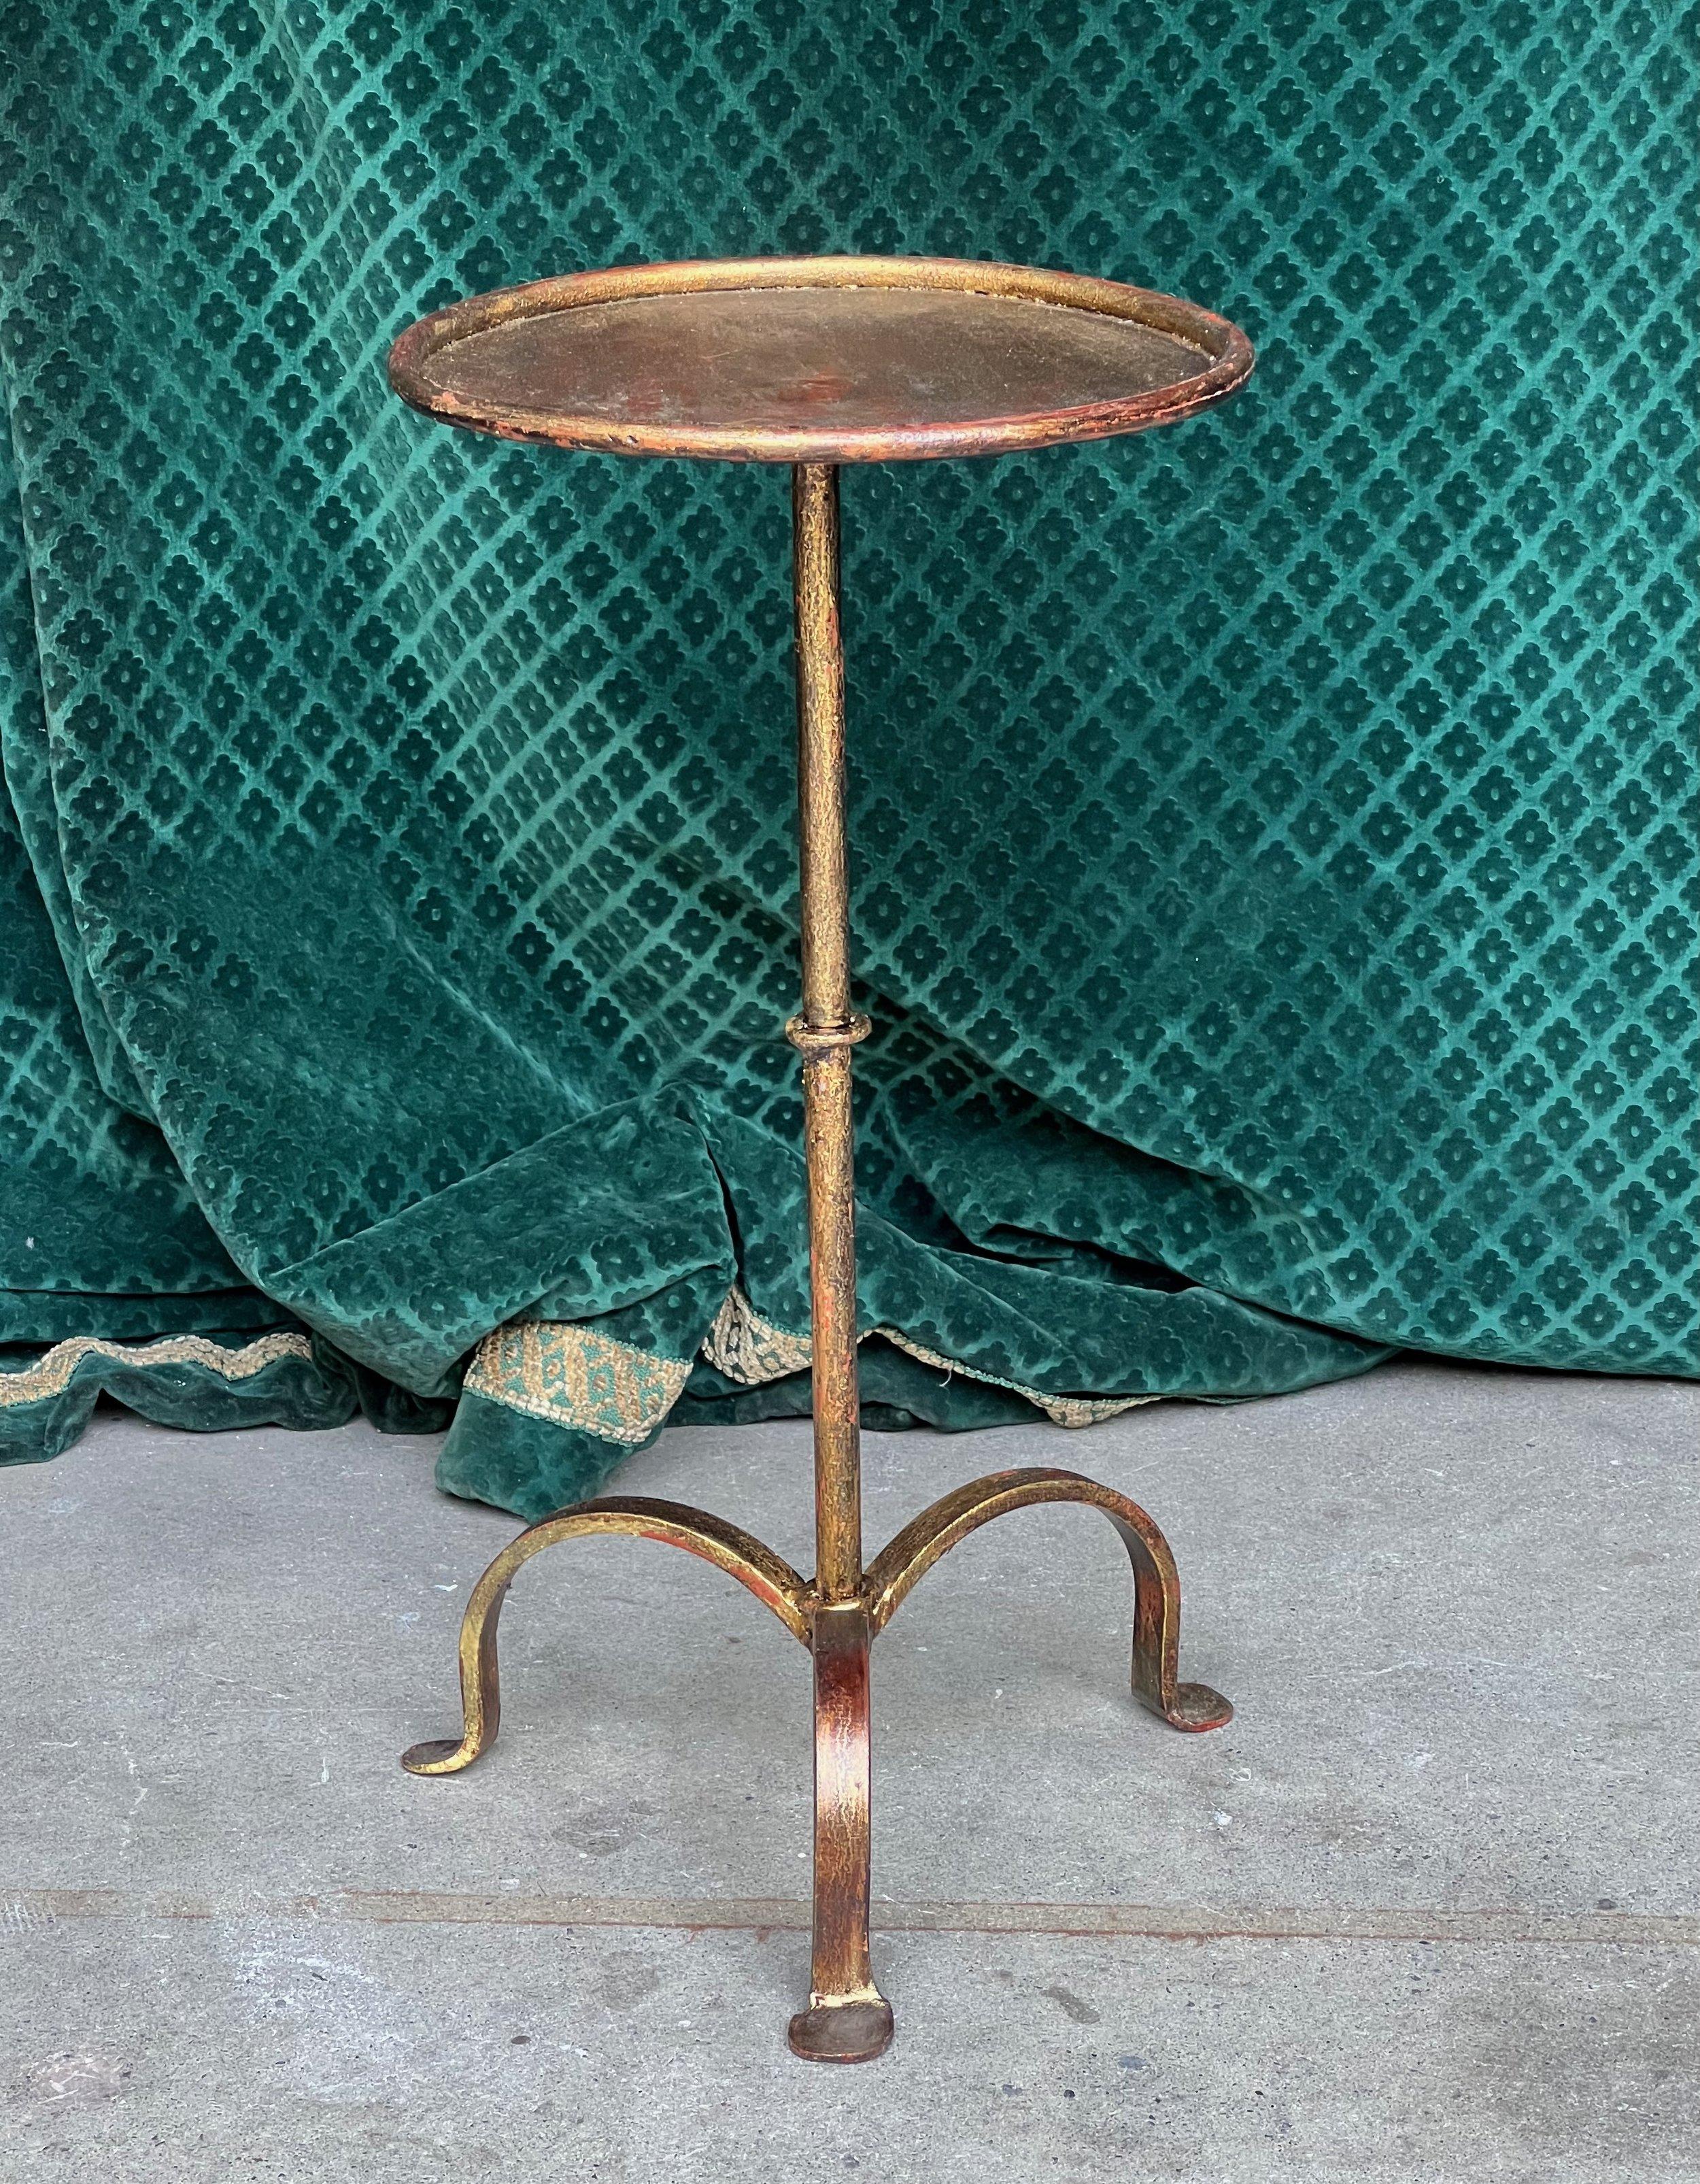 An enchanting small gilt iron martini table from Spain, a remarkable fusion of aesthetics and utility, designed to elevate the ambiance of your living space. This sophisticated drinks table features a distinct tripod base with three gracefully